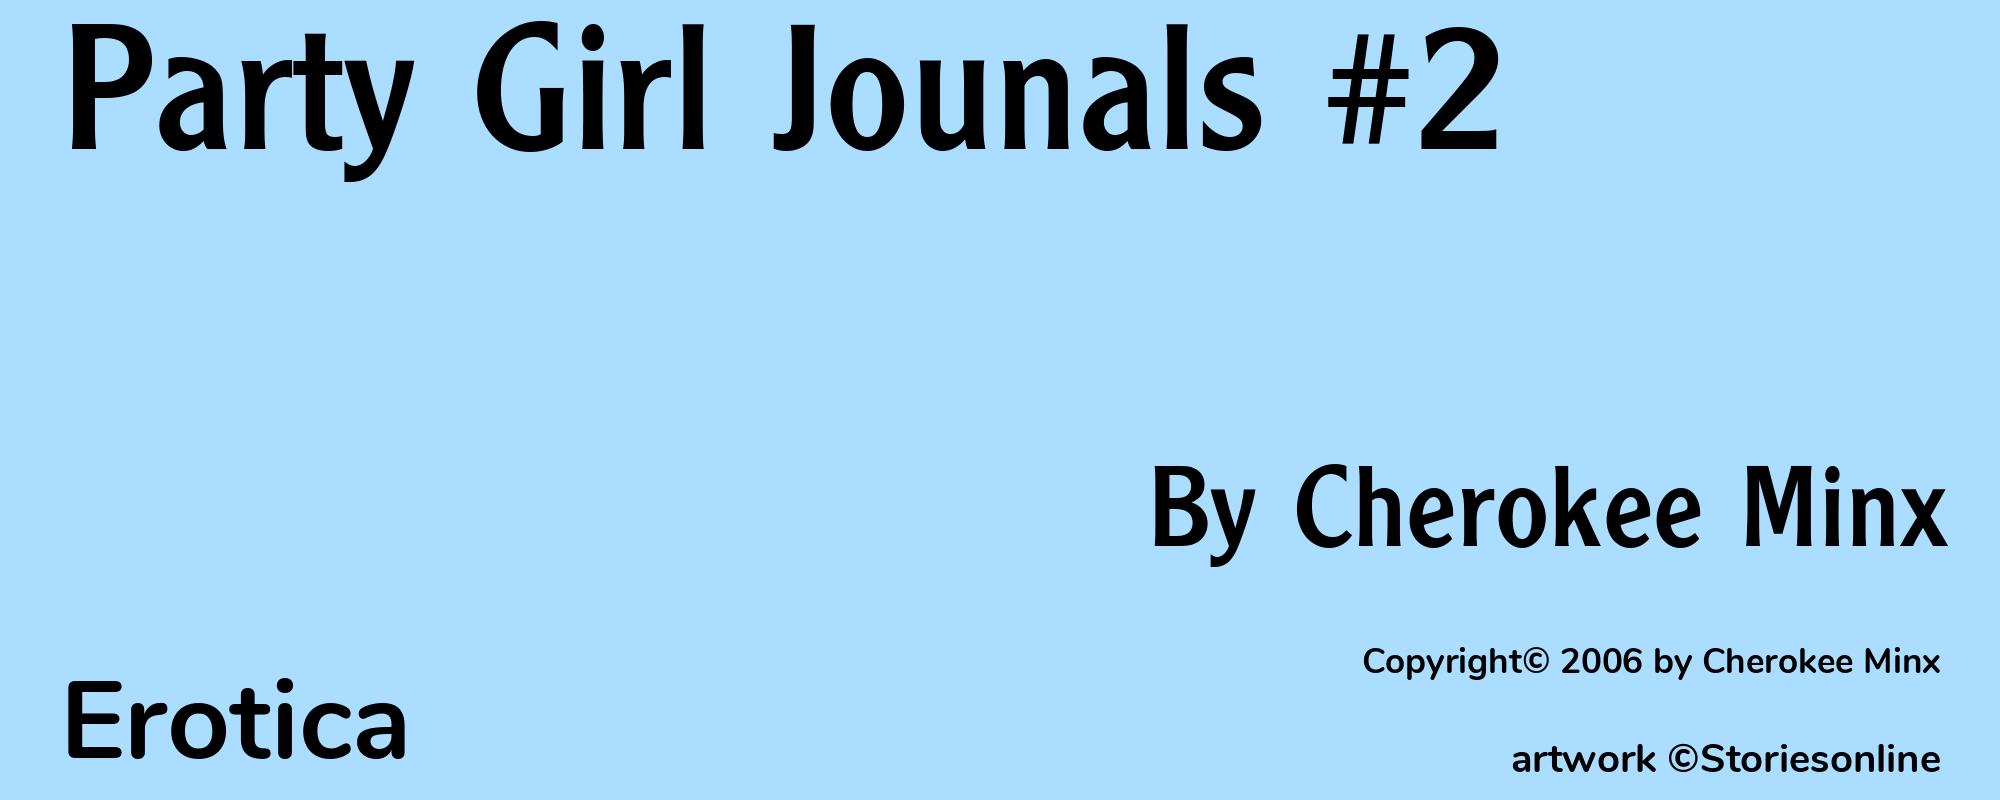 Party Girl Jounals #2 - Cover